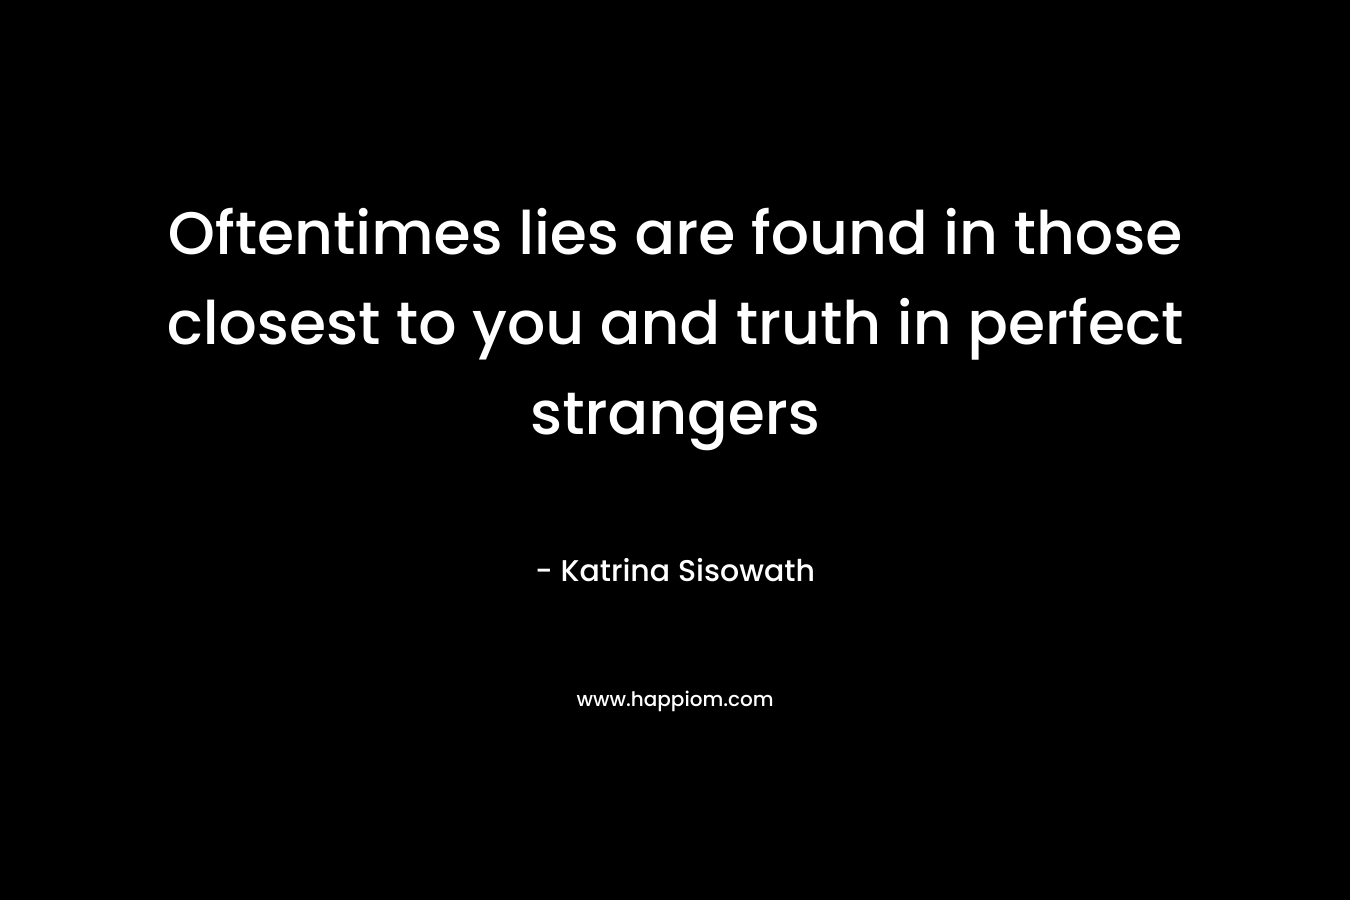 Oftentimes lies are found in those closest to you and truth in perfect strangers